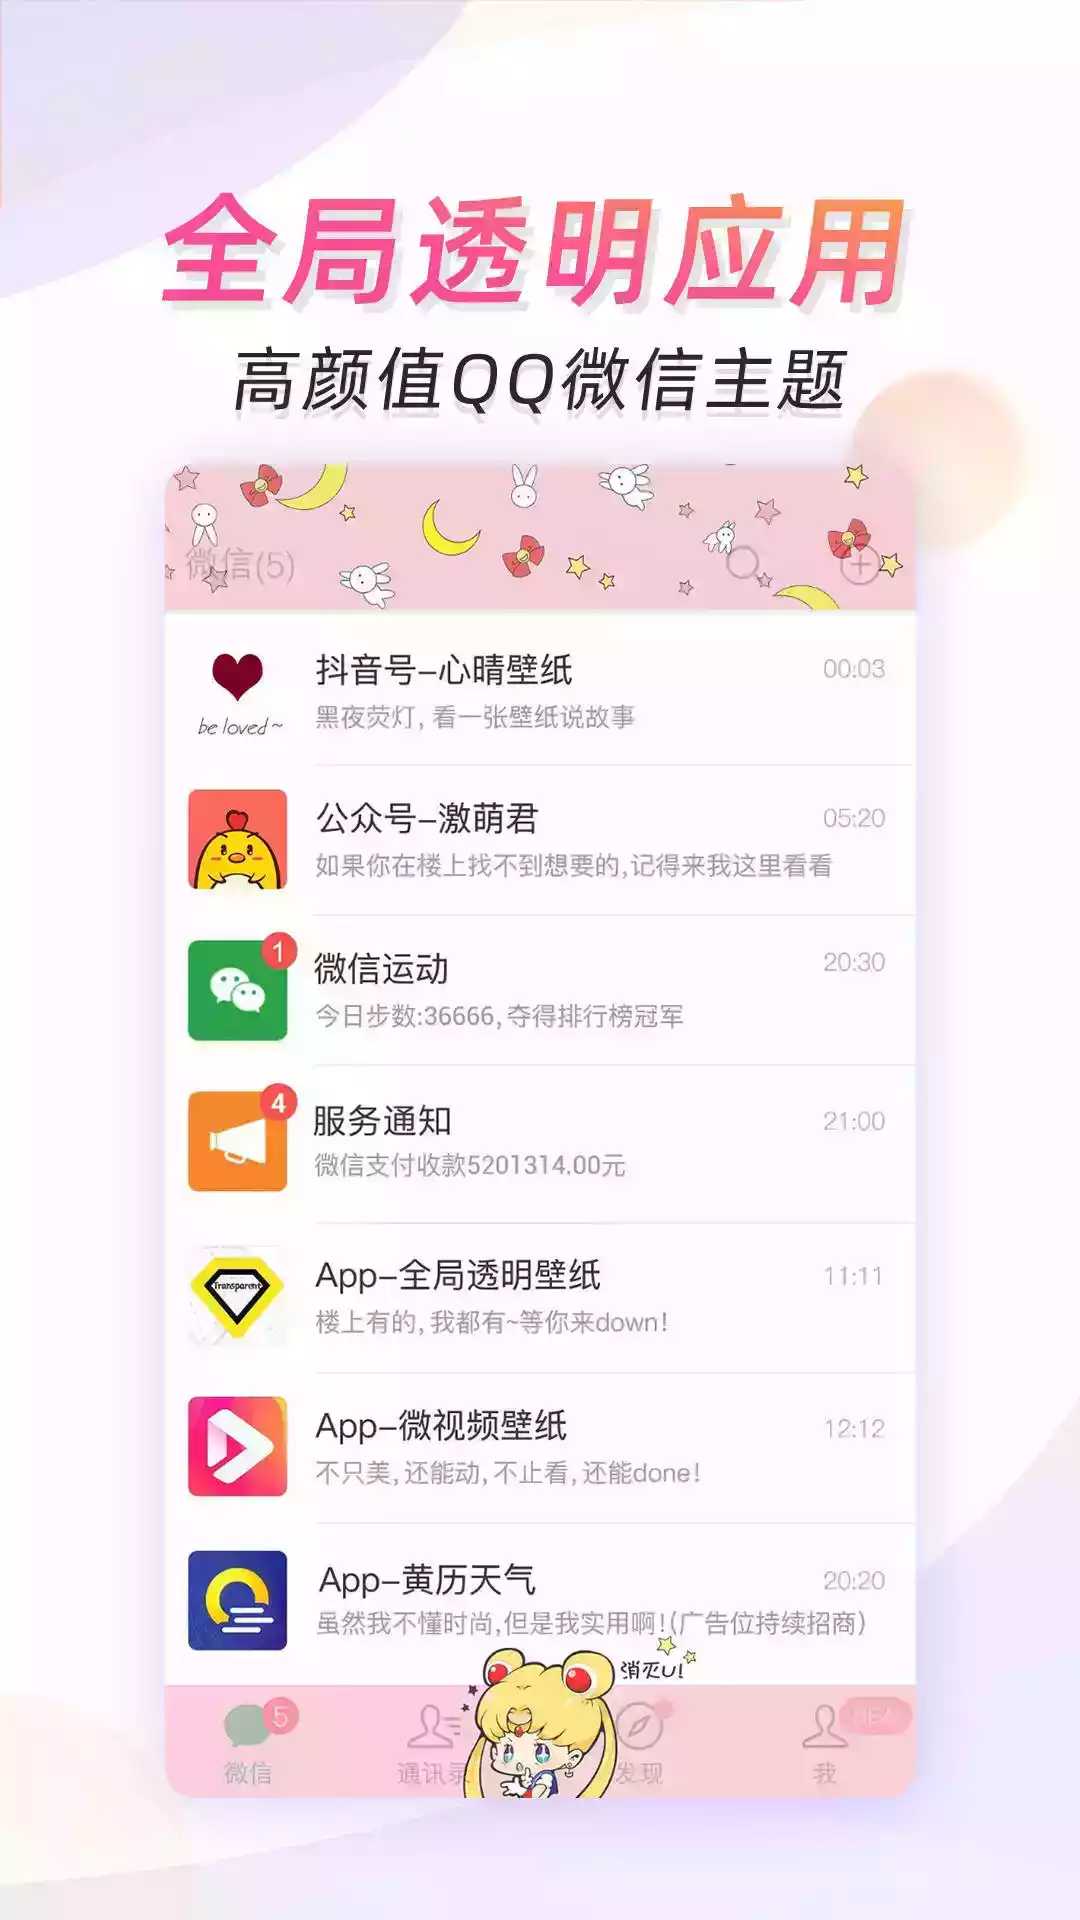 x桌面android版